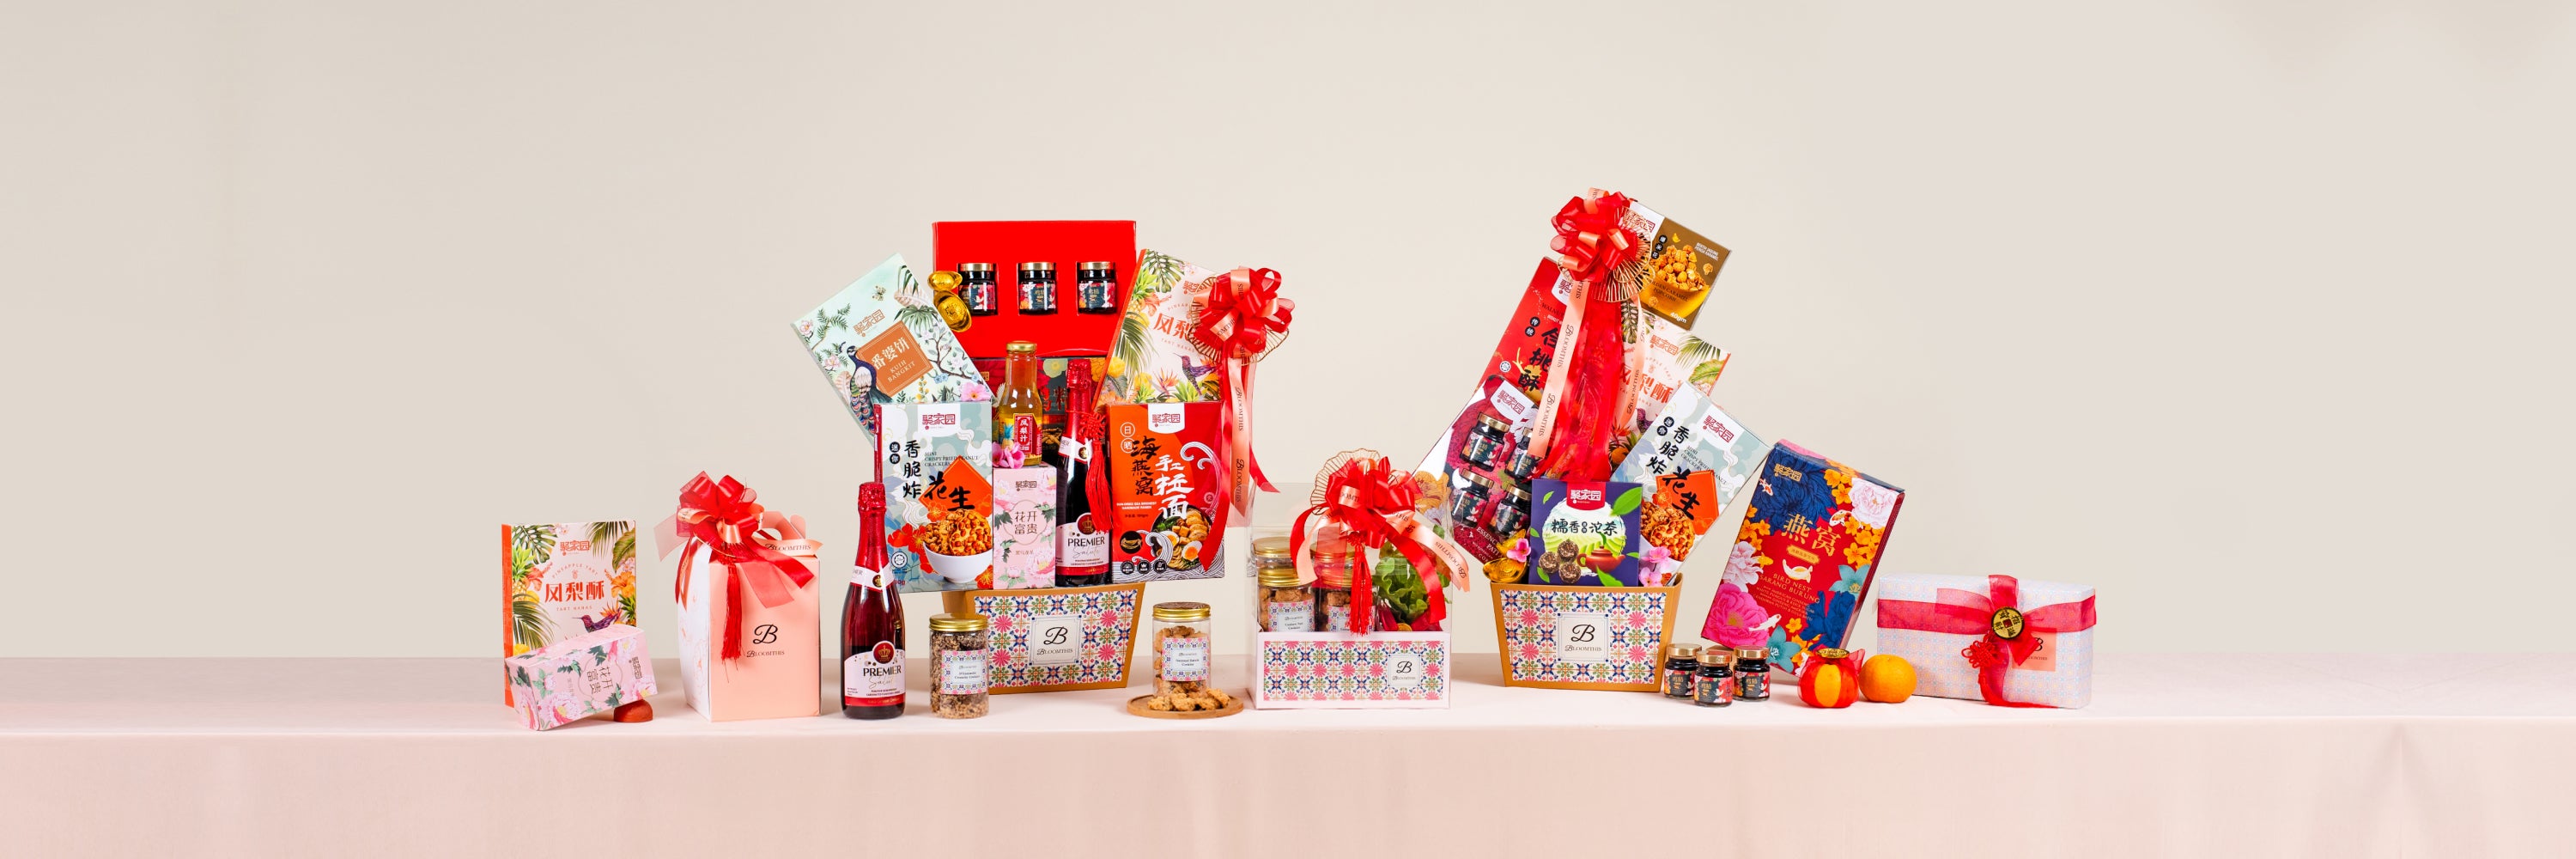 Chinese New Year hampers & gifts by BloomThis